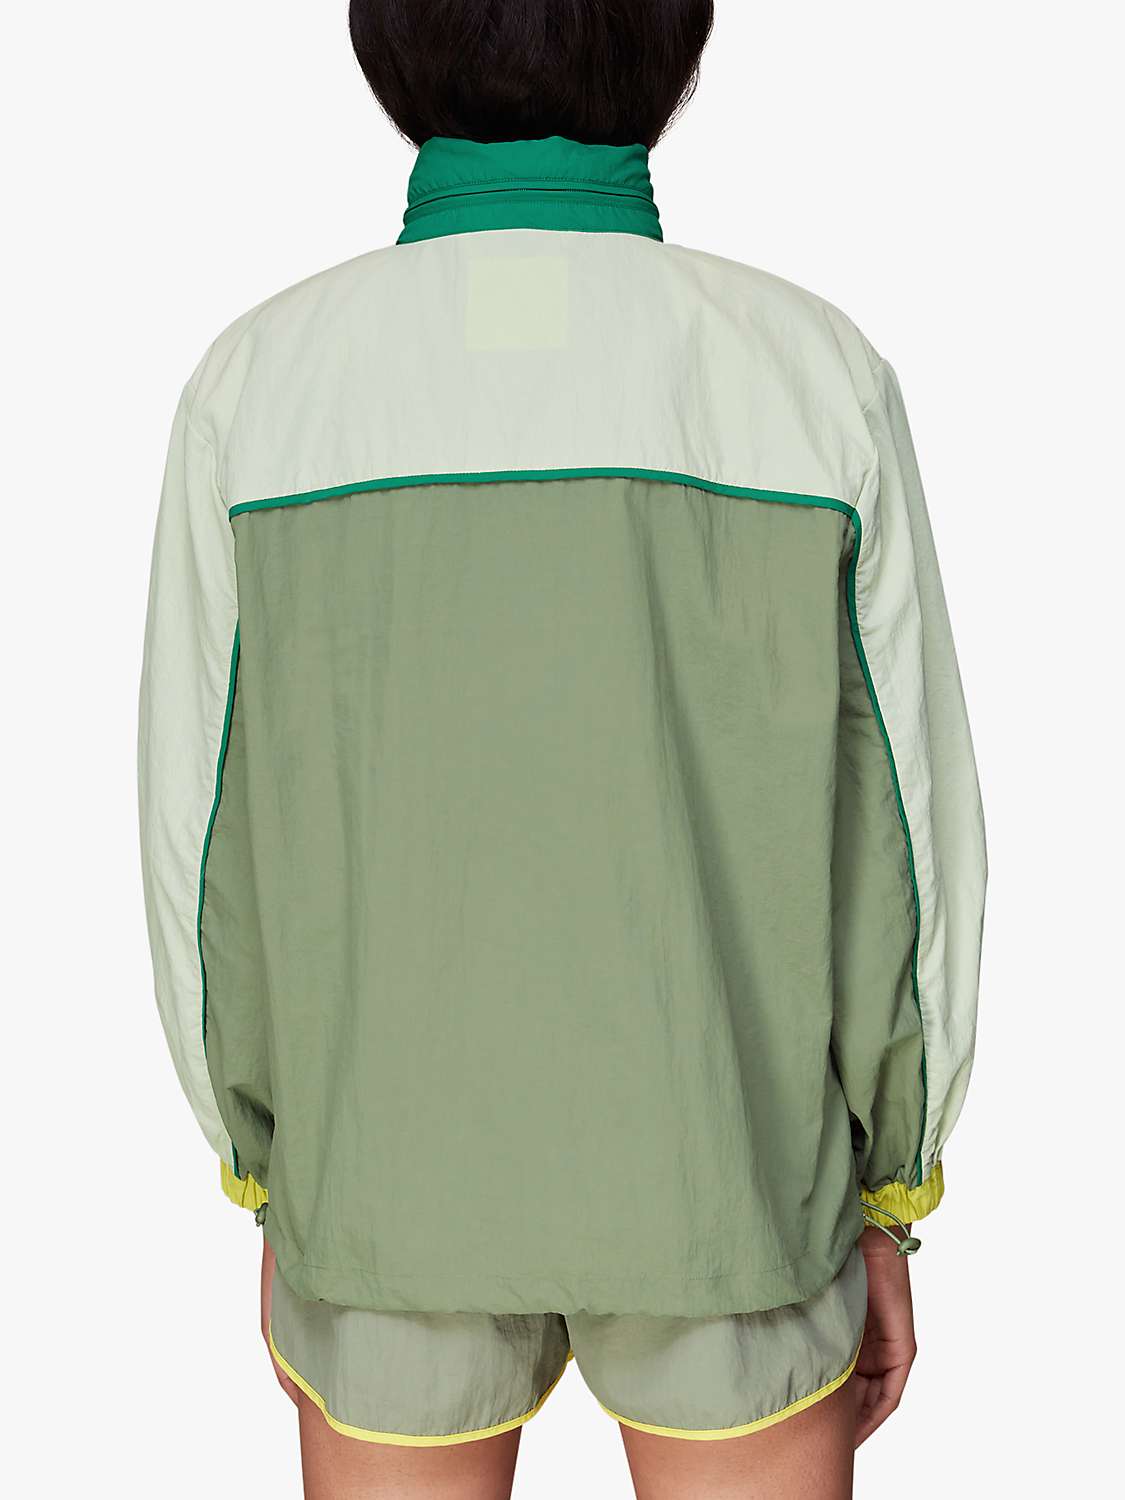 Buy Whistles Colour Block Anorak Sports Top, Green/Multi Online at johnlewis.com